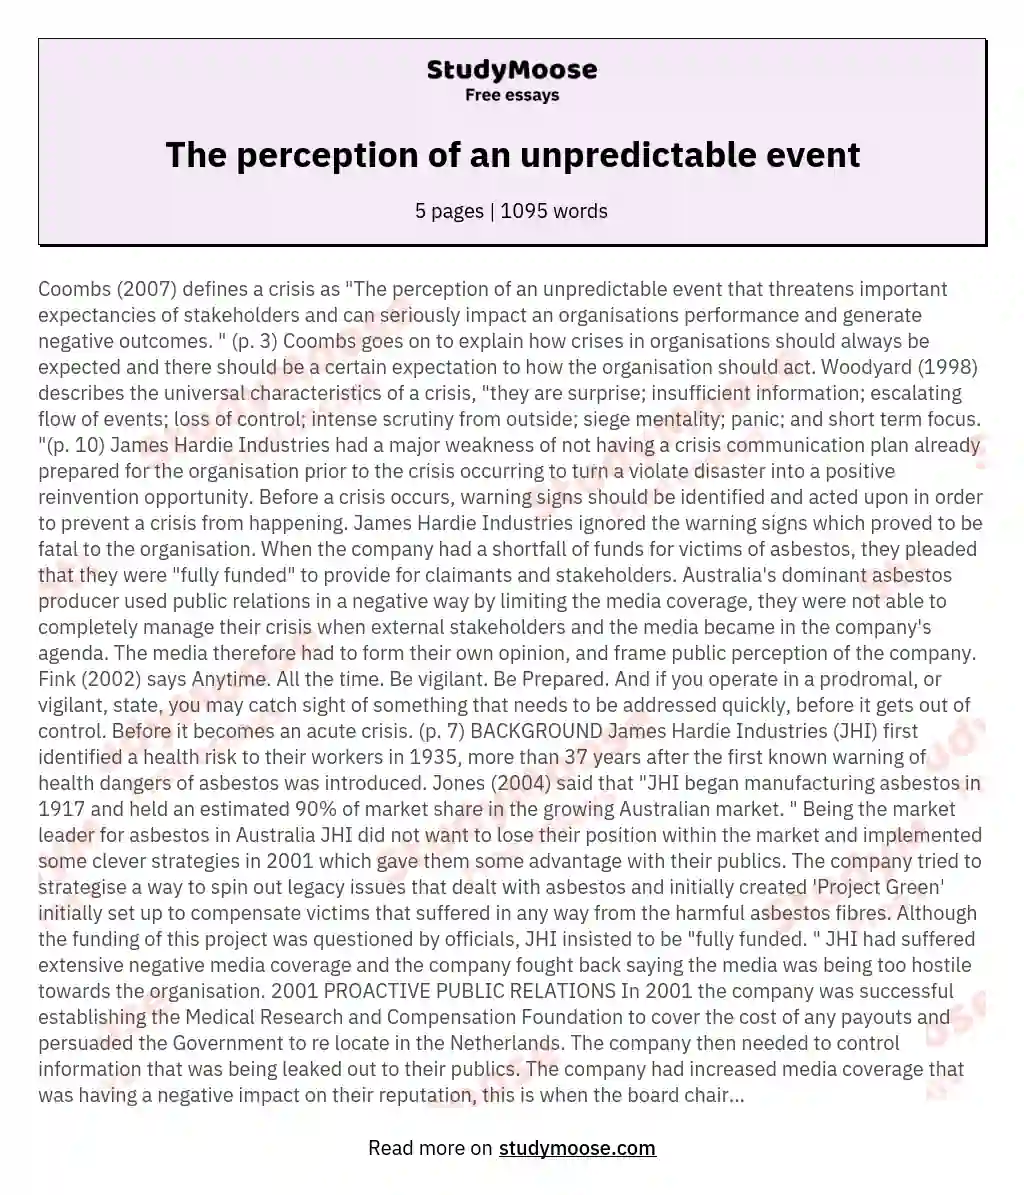 The perception of an unpredictable event